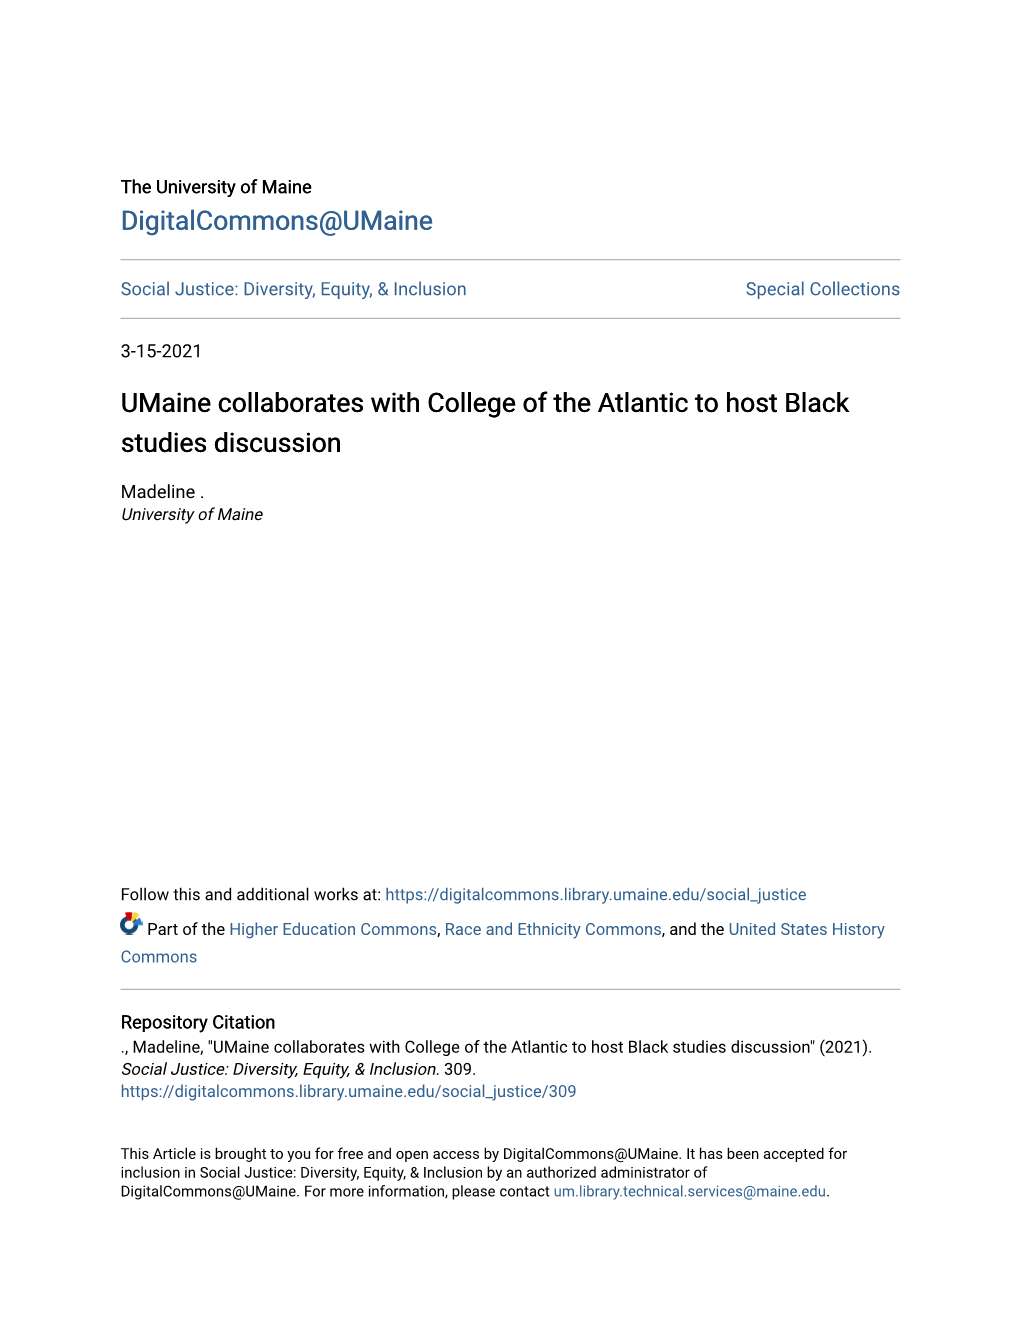 Umaine Collaborates with College of the Atlantic to Host Black Studies Discussion